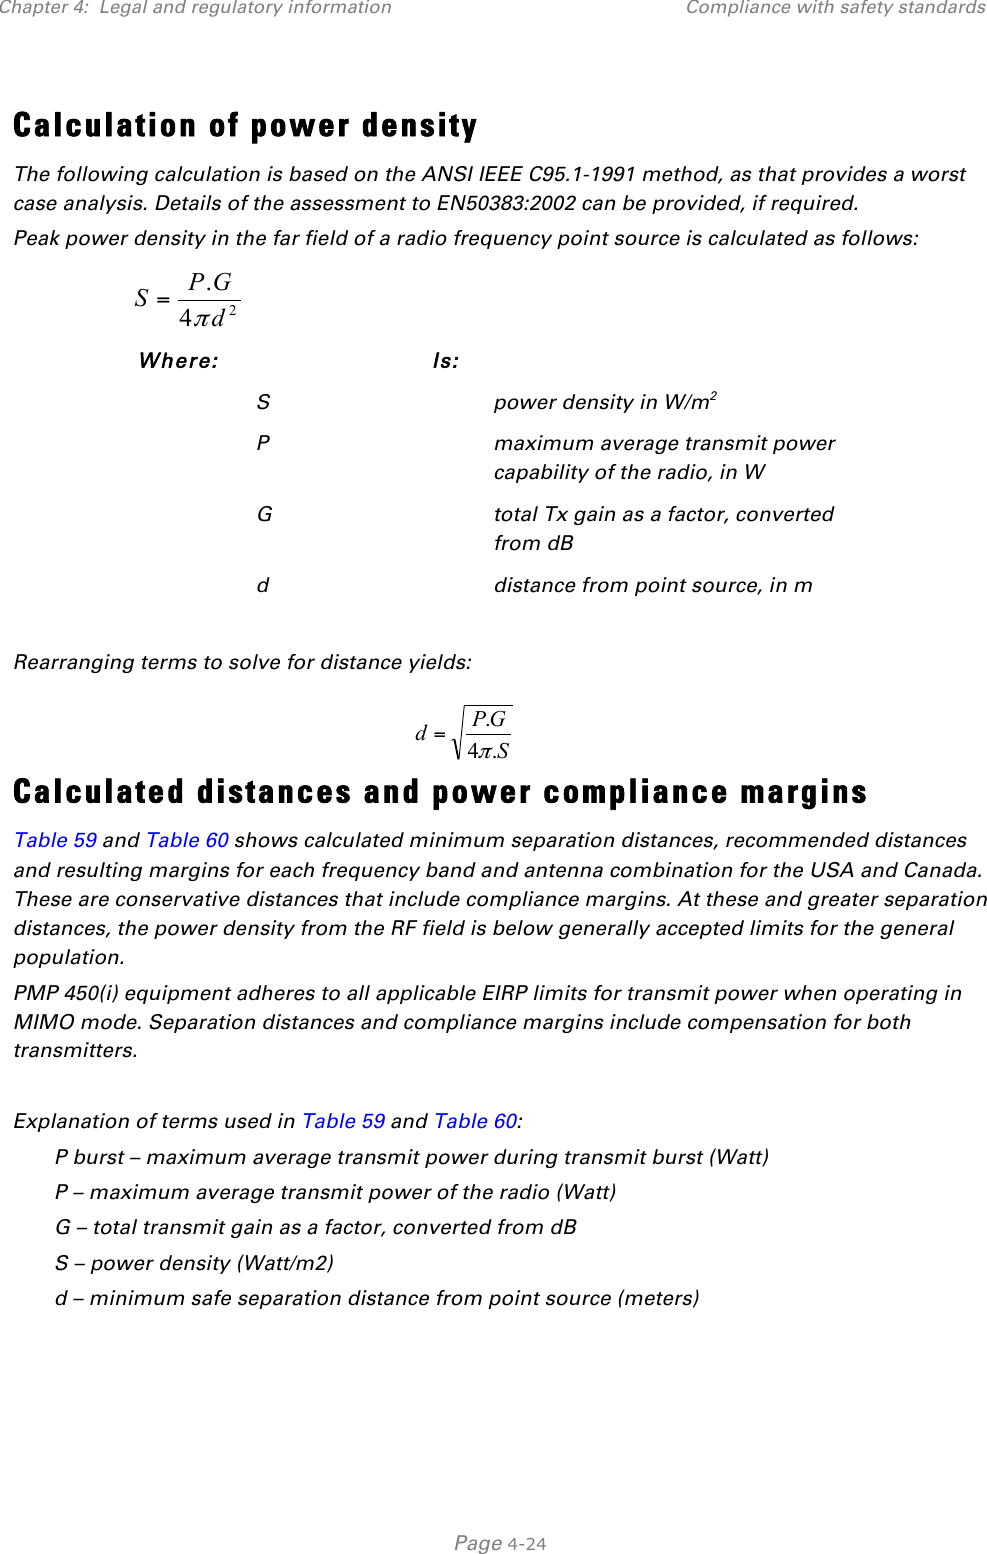 Chapter 4:  Legal and regulatory information Compliance with safety standards   Page 4-24 Calculation of power density The following calculation is based on the ANSI IEEE C95.1-1991 method, as that provides a worst case analysis. Details of the assessment to EN50383:2002 can be provided, if required. Peak power density in the far field of a radio frequency point source is calculated as follows:   Where:  Is:   S  power density in W/m2  P  maximum average transmit power capability of the radio, in W  G  total Tx gain as a factor, converted from dB  d  distance from point source, in m  Rearranging terms to solve for distance yields:   Calculated distances and power compliance margins Table 59 and Table 60 shows calculated minimum separation distances, recommended distances and resulting margins for each frequency band and antenna combination for the USA and Canada. These are conservative distances that include compliance margins. At these and greater separation distances, the power density from the RF field is below generally accepted limits for the general population. PMP 450(i) equipment adheres to all applicable EIRP limits for transmit power when operating in MIMO mode. Separation distances and compliance margins include compensation for both transmitters.  Explanation of terms used in Table 59 and Table 60: P burst – maximum average transmit power during transmit burst (Watt) P – maximum average transmit power of the radio (Watt) G – total transmit gain as a factor, converted from dB S – power density (Watt/m2) d – minimum safe separation distance from point source (meters)  24.dGPSπ=SGPd.4.π=